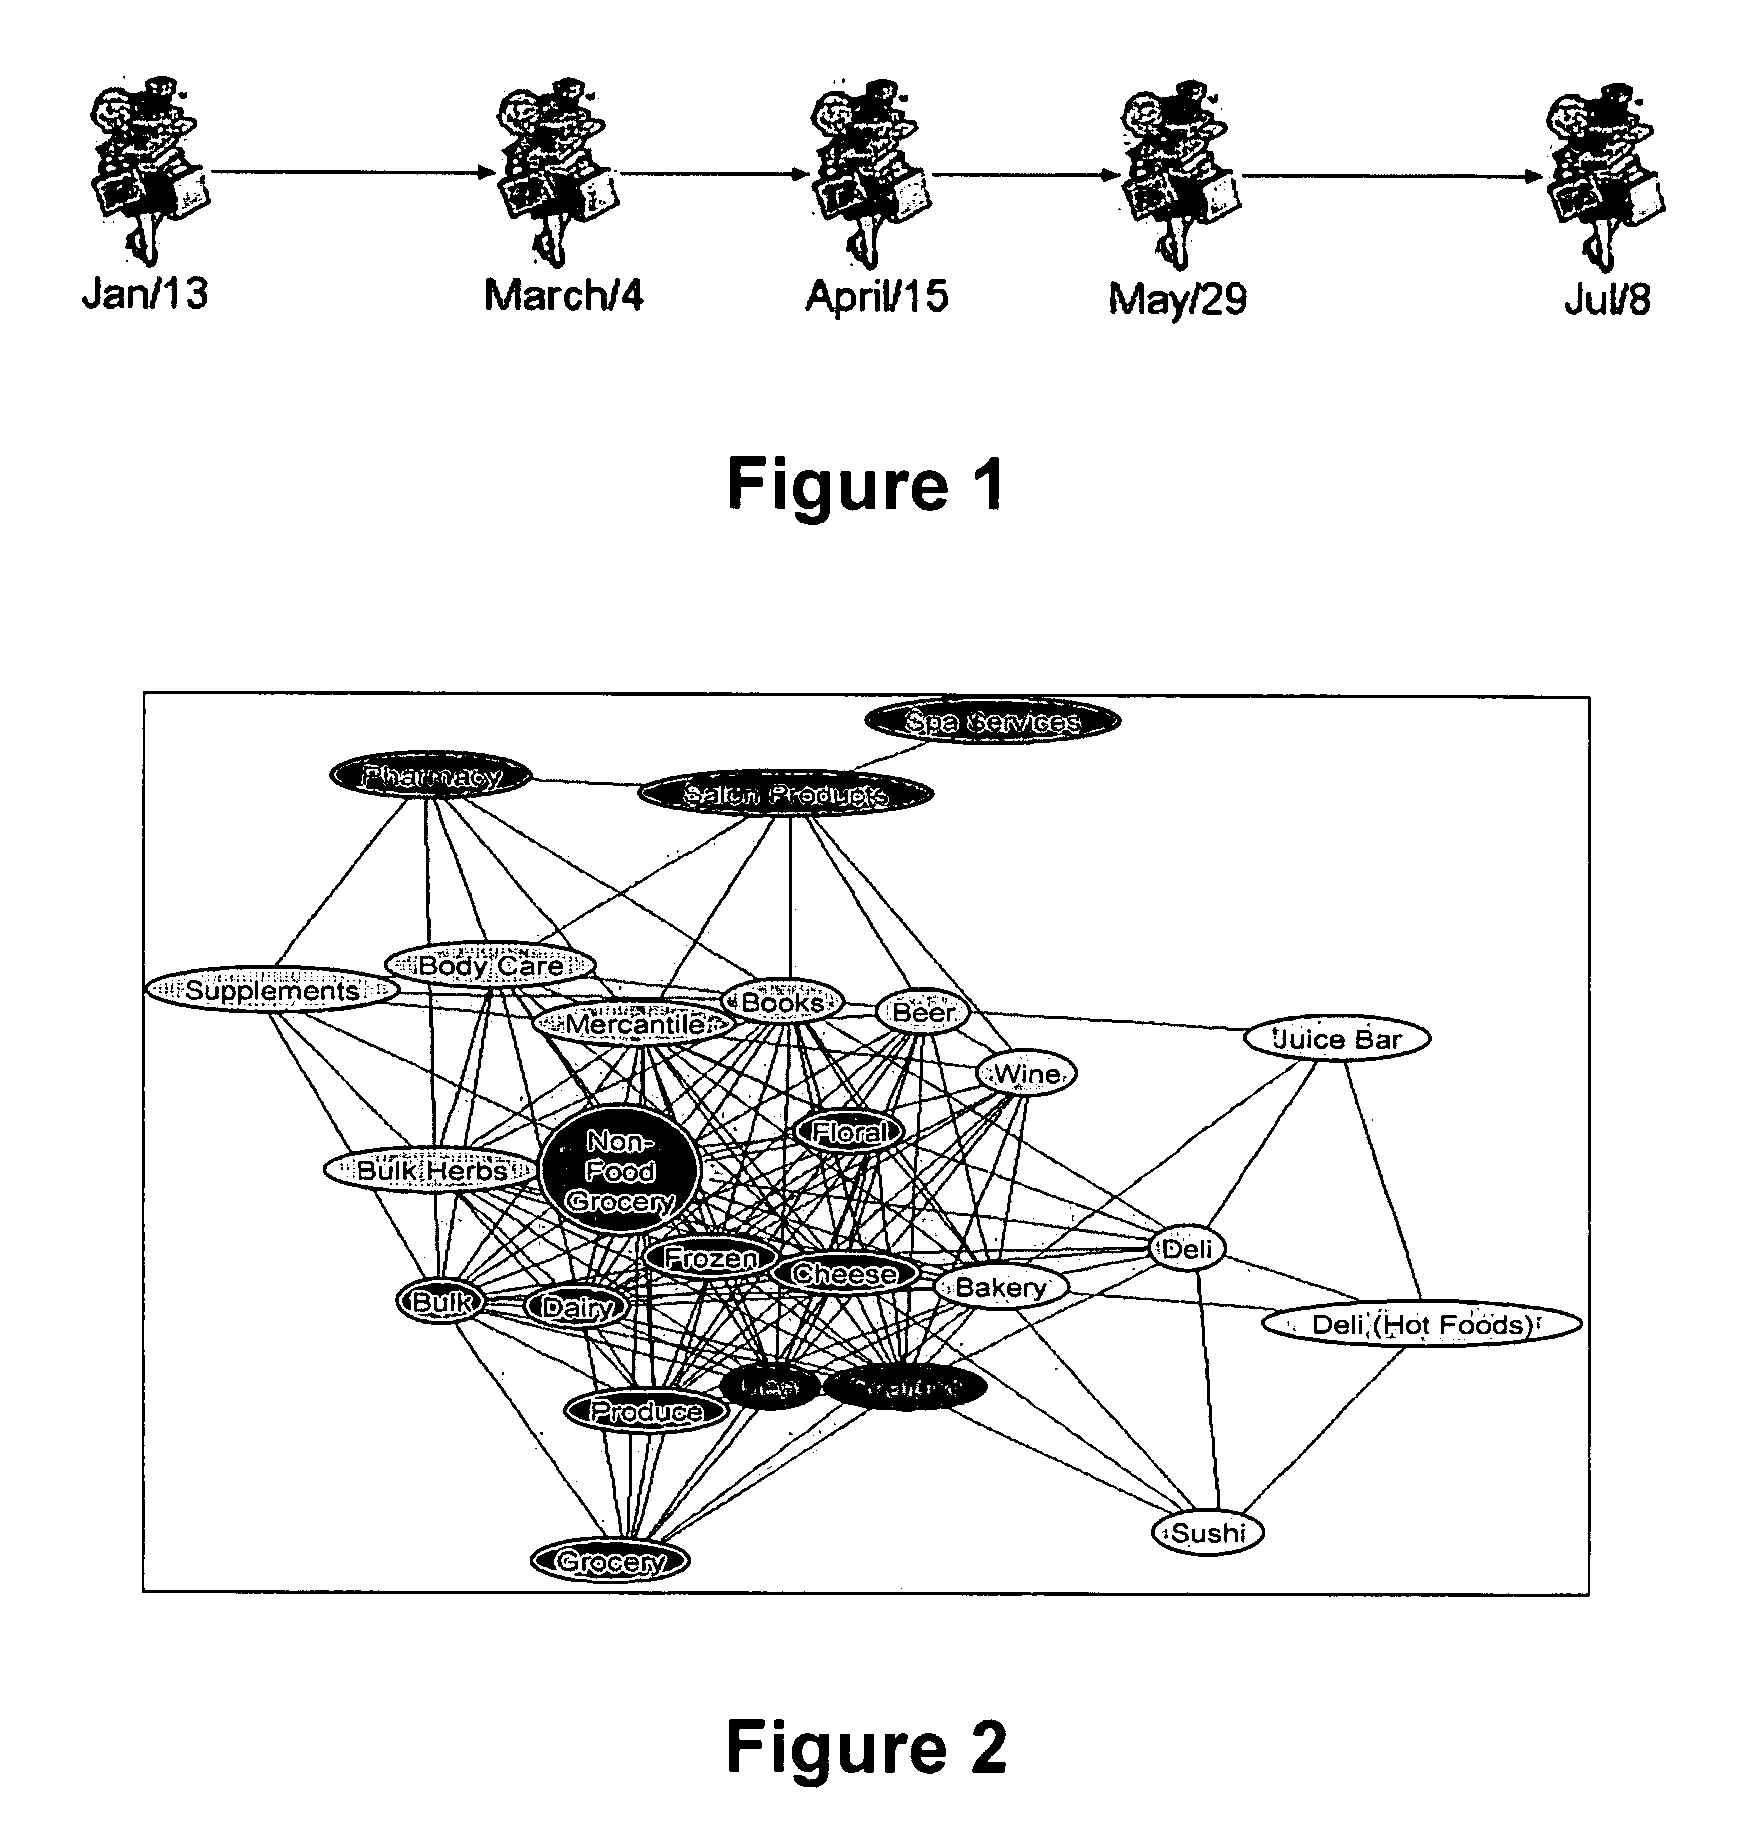 Method and apparatus for retail data mining using pair-wise co-occurrence consistency